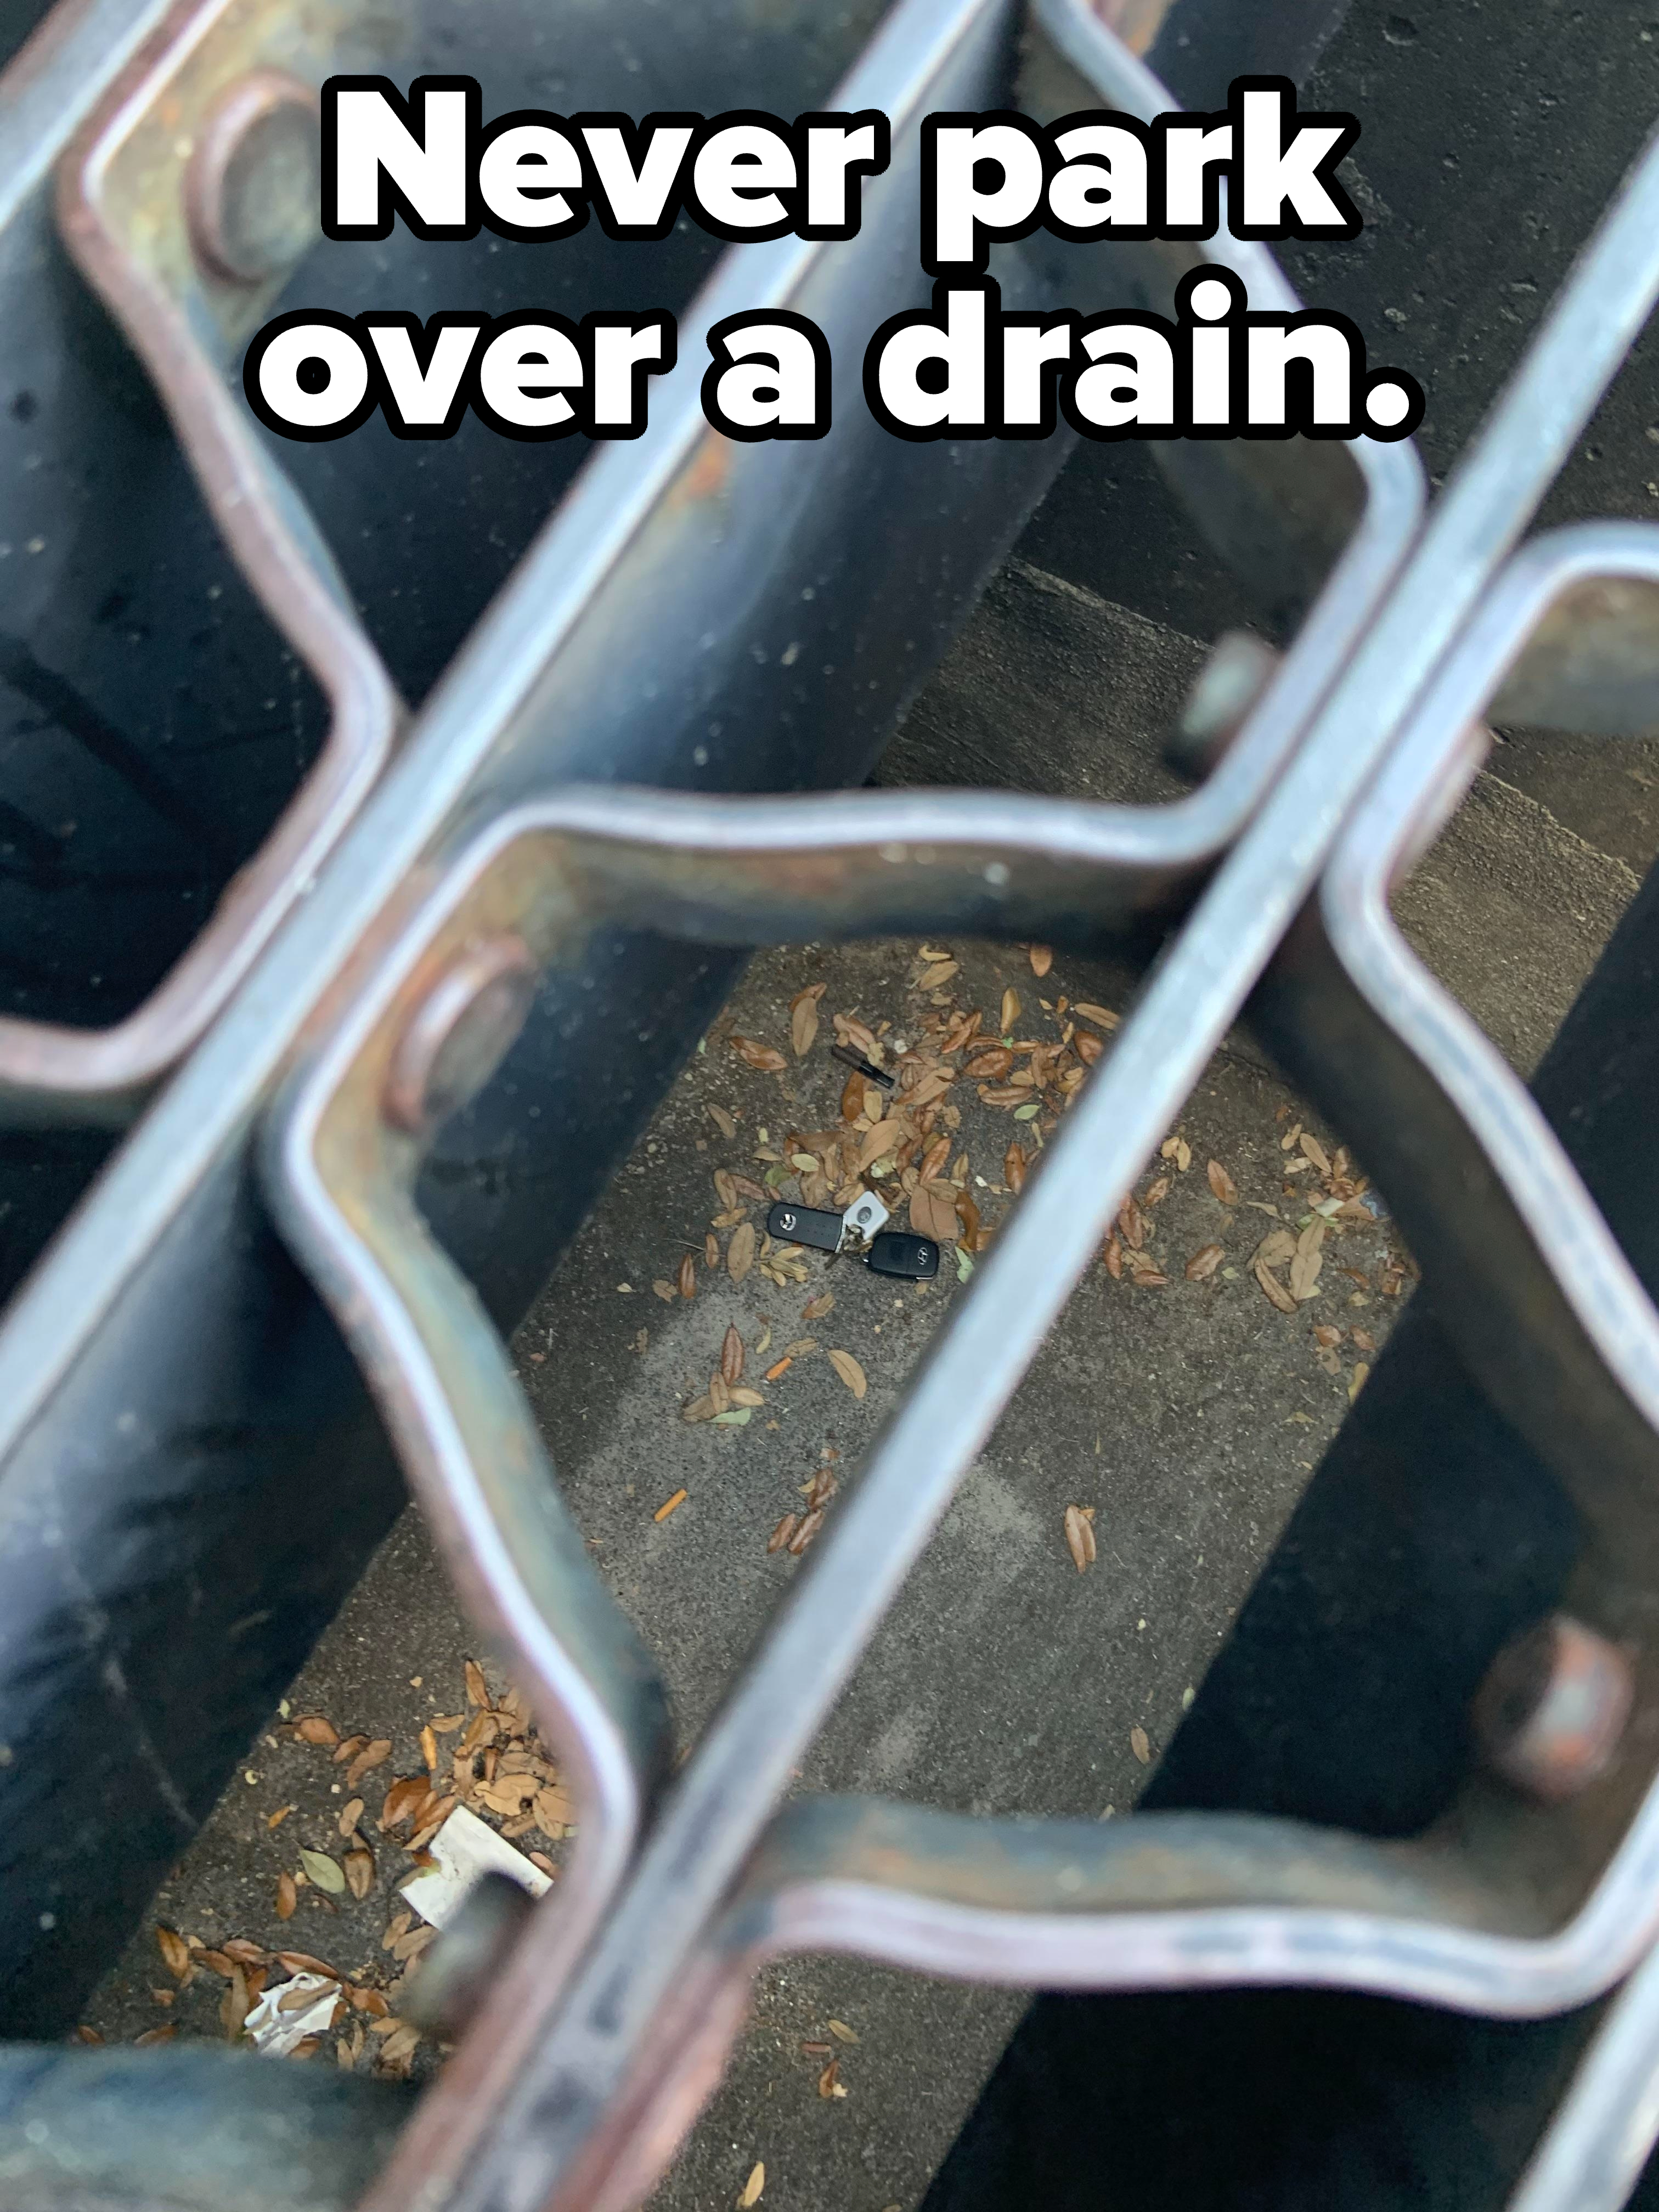 Car key fob at the bottom of a drain, as seen through a metal grate, with caption &quot;Never park over a drain&quot;